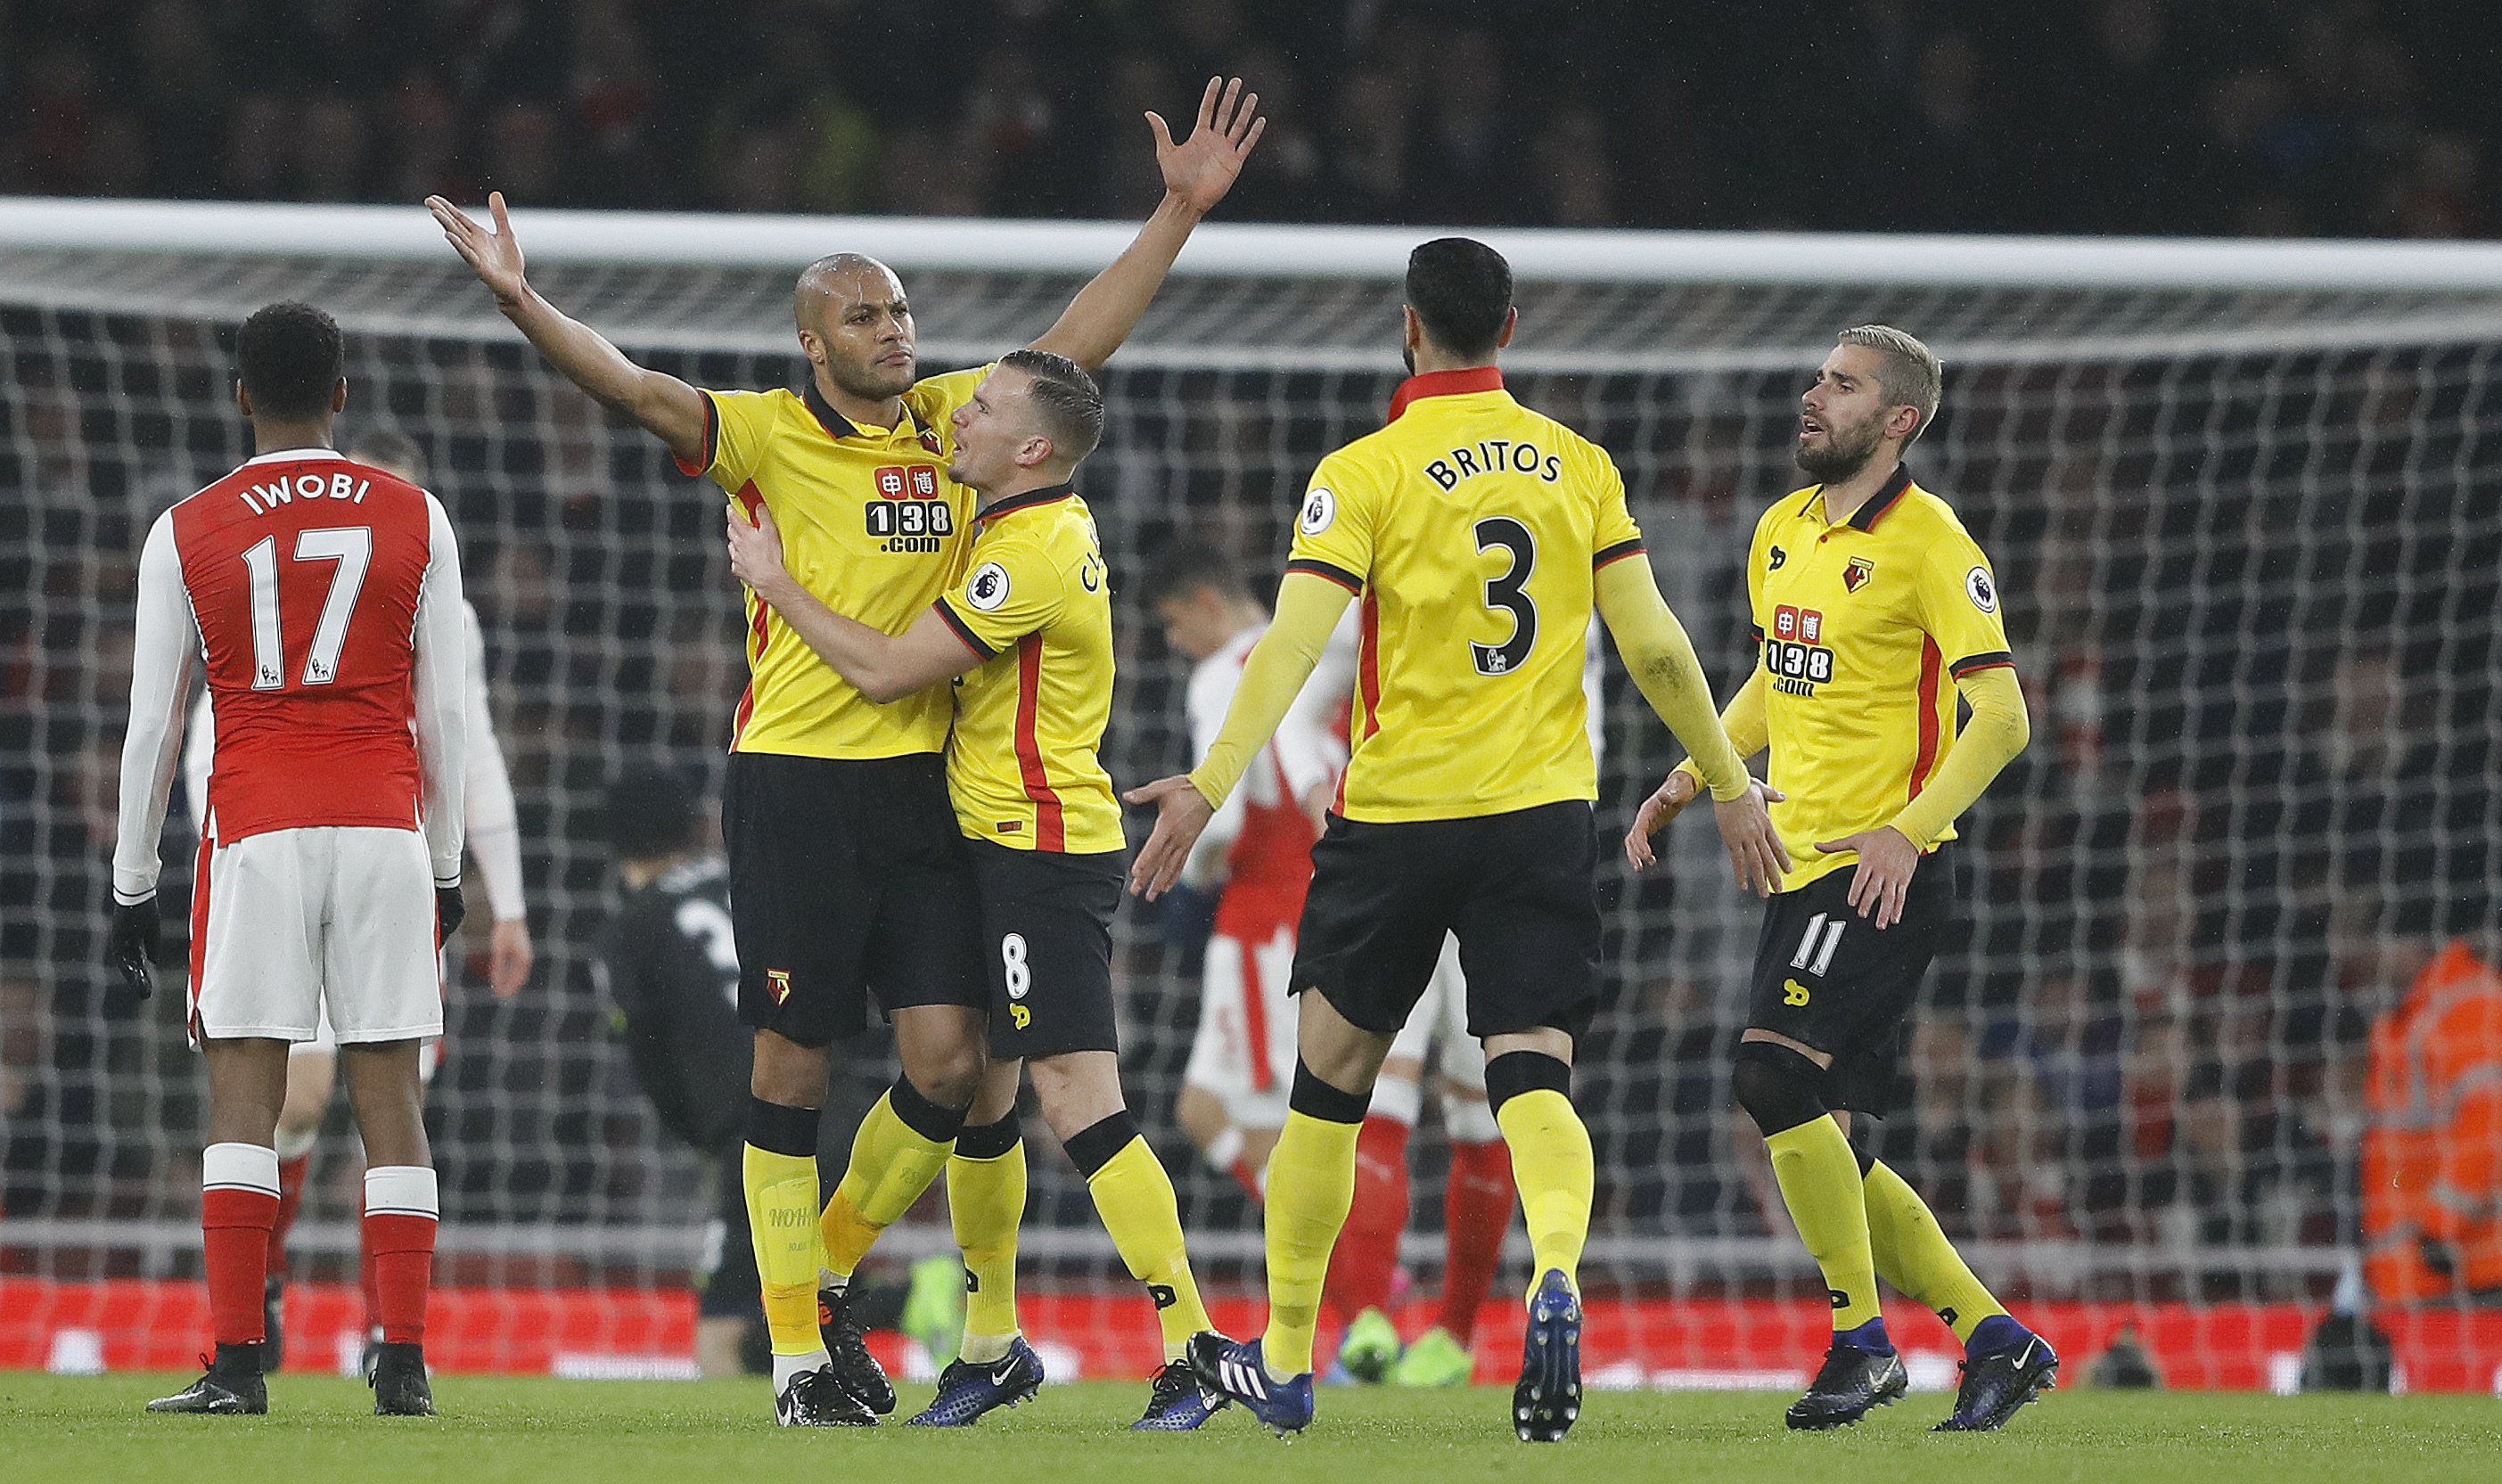 Watford's Younes Kaboul,second left, celebrates after scoring during the English Premier League soccer match between Arsenal and Watford at the Emirates stadium in London, Tuesday, Jan. 31, 2017. (AP Photo/Frank Augstein)